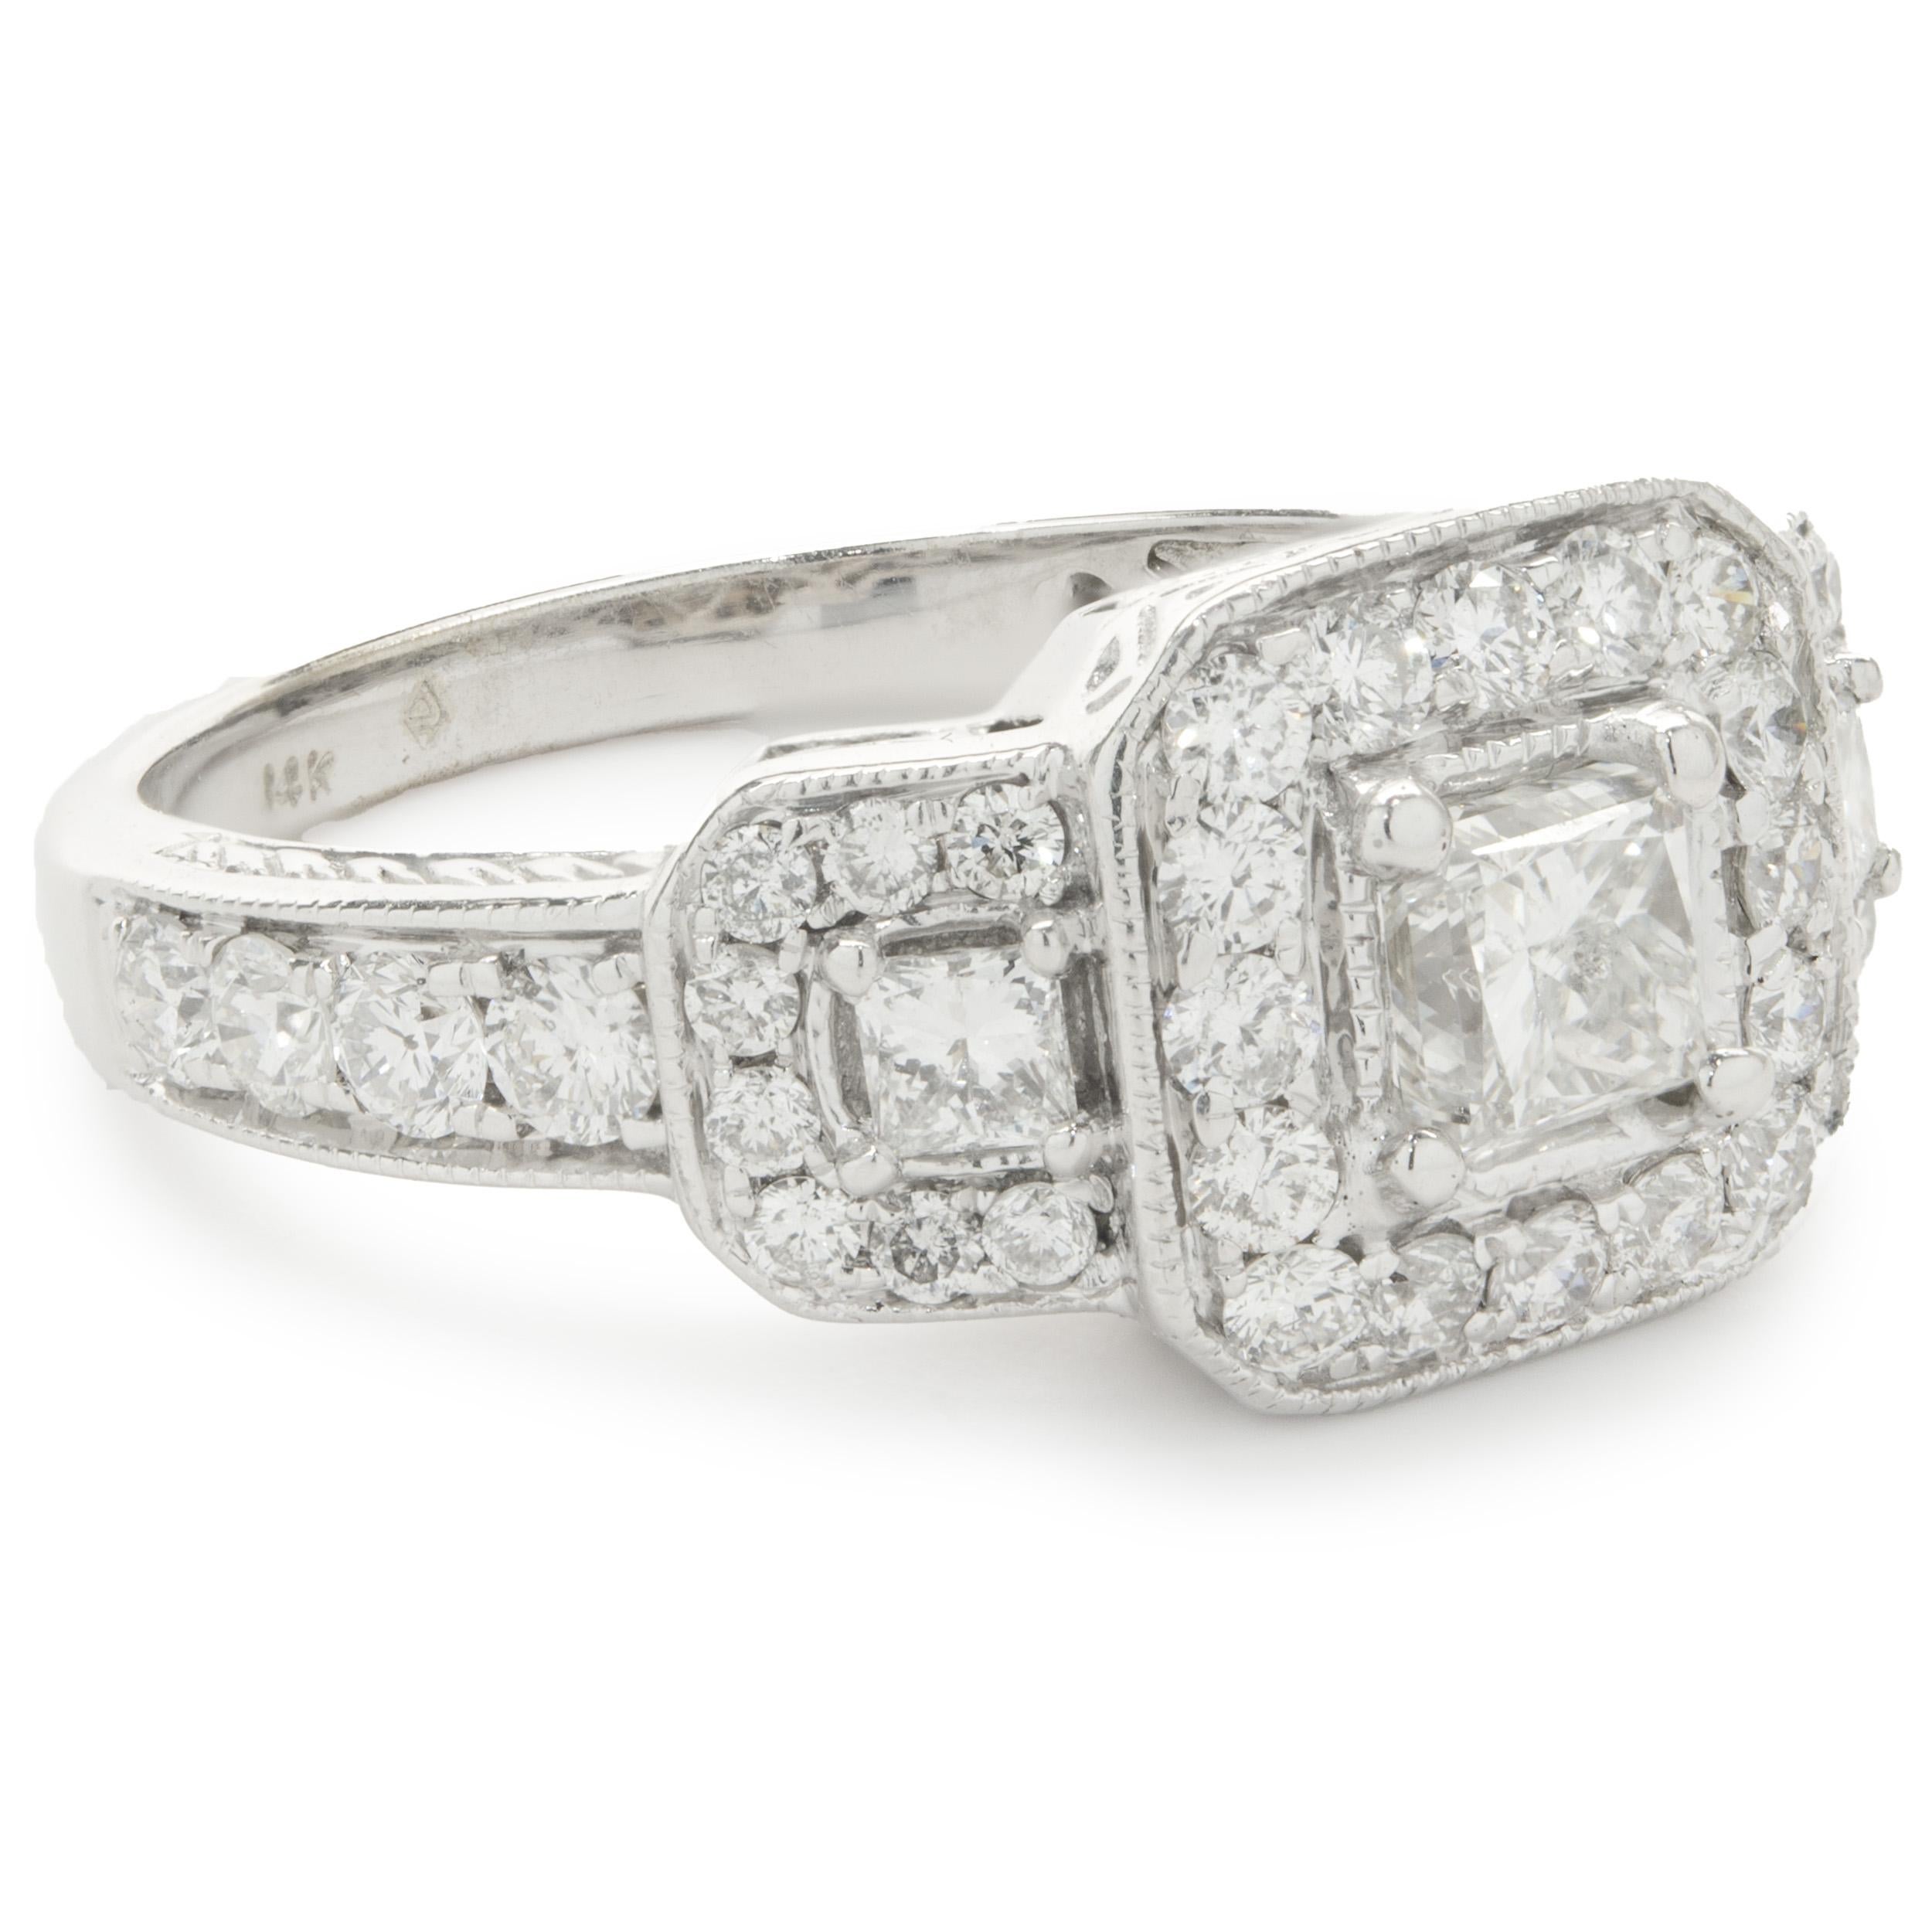 Designer: custom
Material: 14k white gold 
Diamond: 3 princess cut = 0.53cttw
Color: G
Clarity: SI1-2
Diamond: 40 round brilliant cut = .72cttw
Color: G
Clarity: SI1-2
Ring Size: 7 (please allow two additional shipping days for sizing